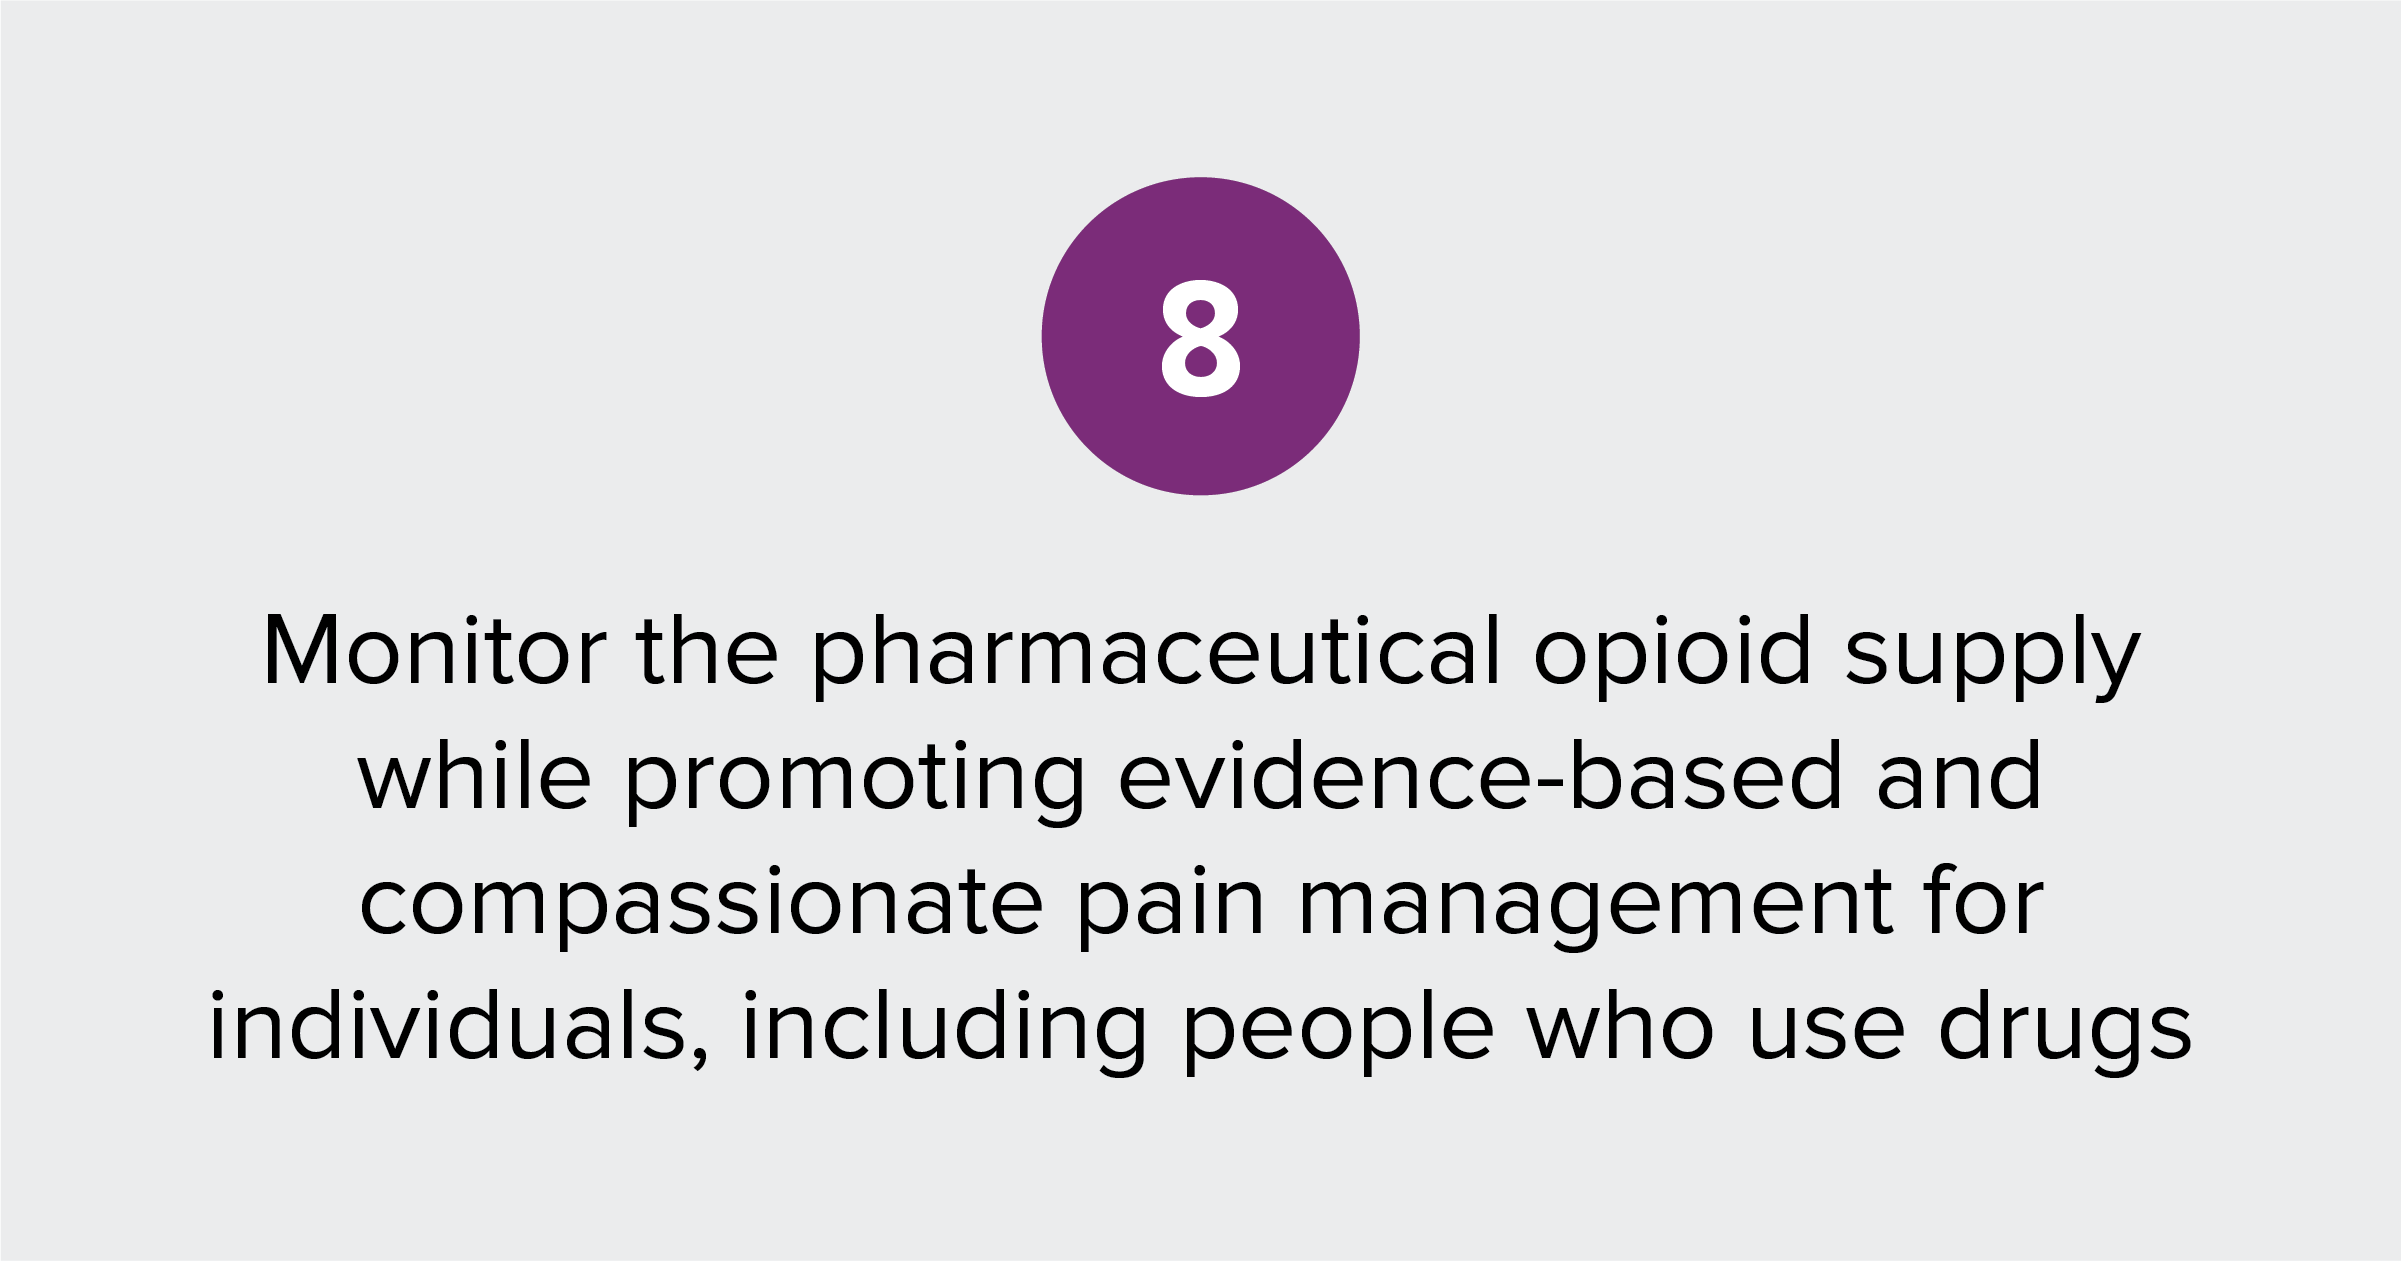 Text of report recommendation 8: Monitor the pharmaceutical opioid supply while promoting evidence-based and compassionate pain management for individuals, including people who use drugs